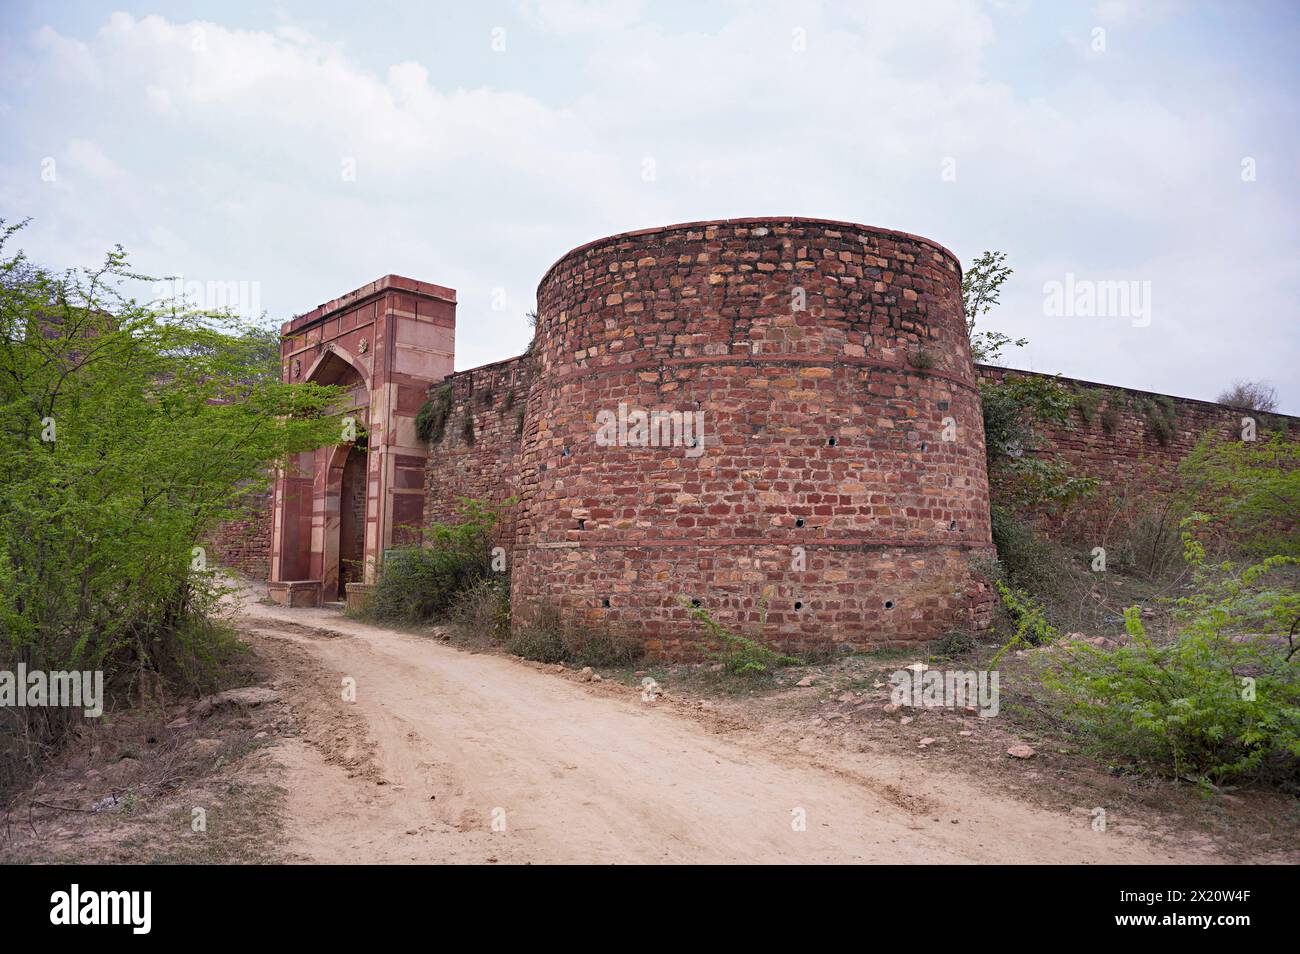 Fortification wall of Shergarh Fort, Dholpur, Rajasthan, India Stock Photo